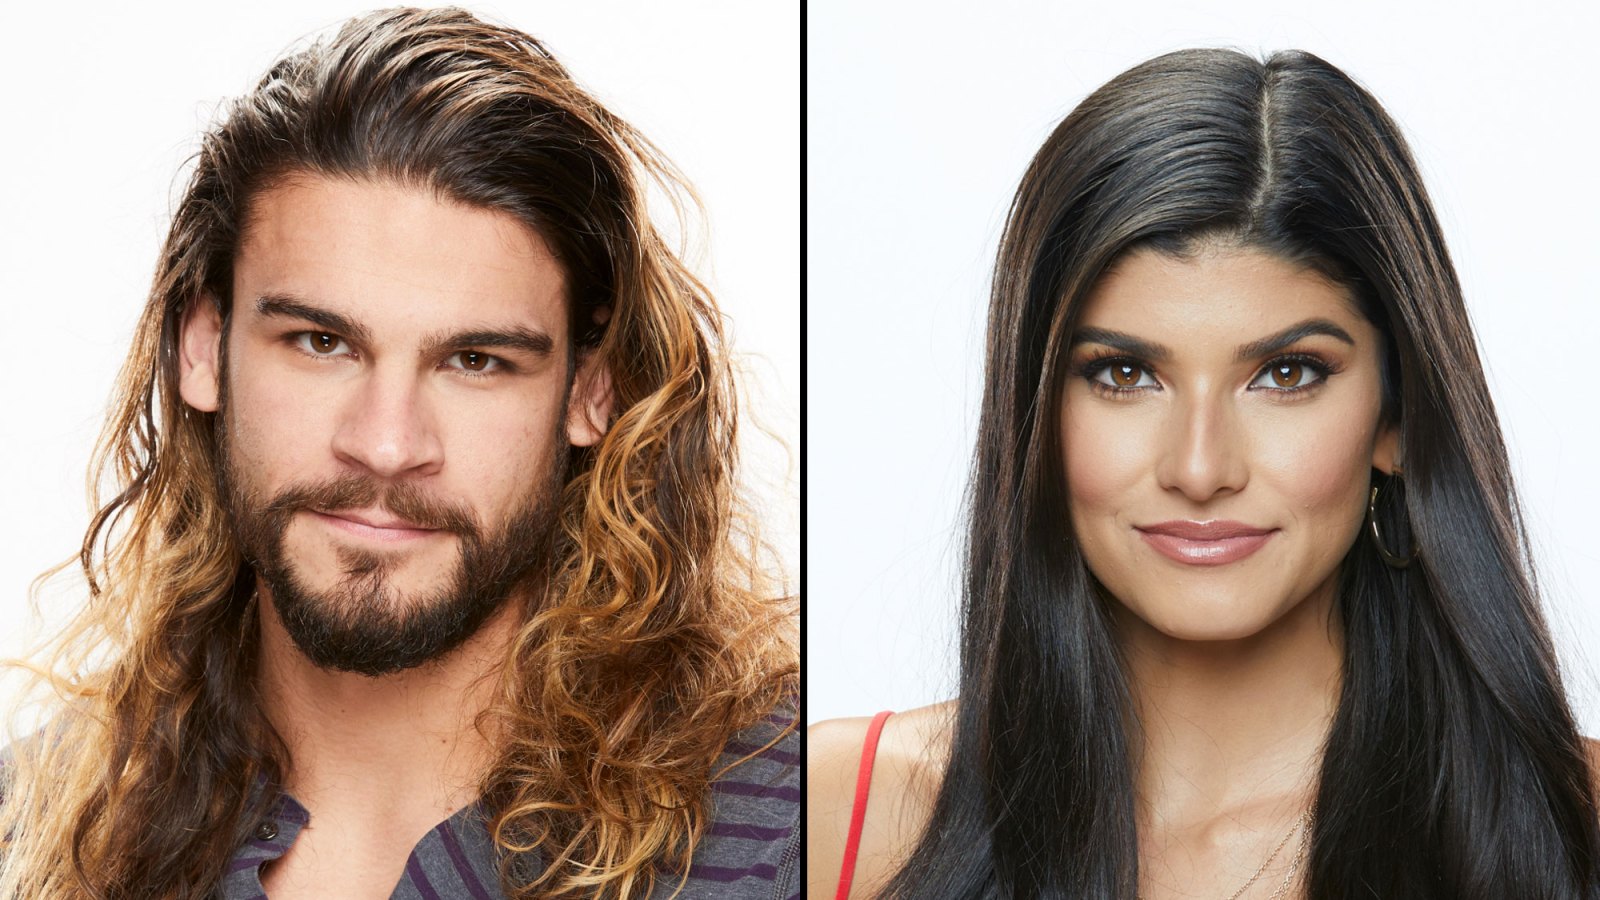 Big Brother’s Jack Matthews and Analyse ‘Sis’ Talavera Split 1 Month After Finale